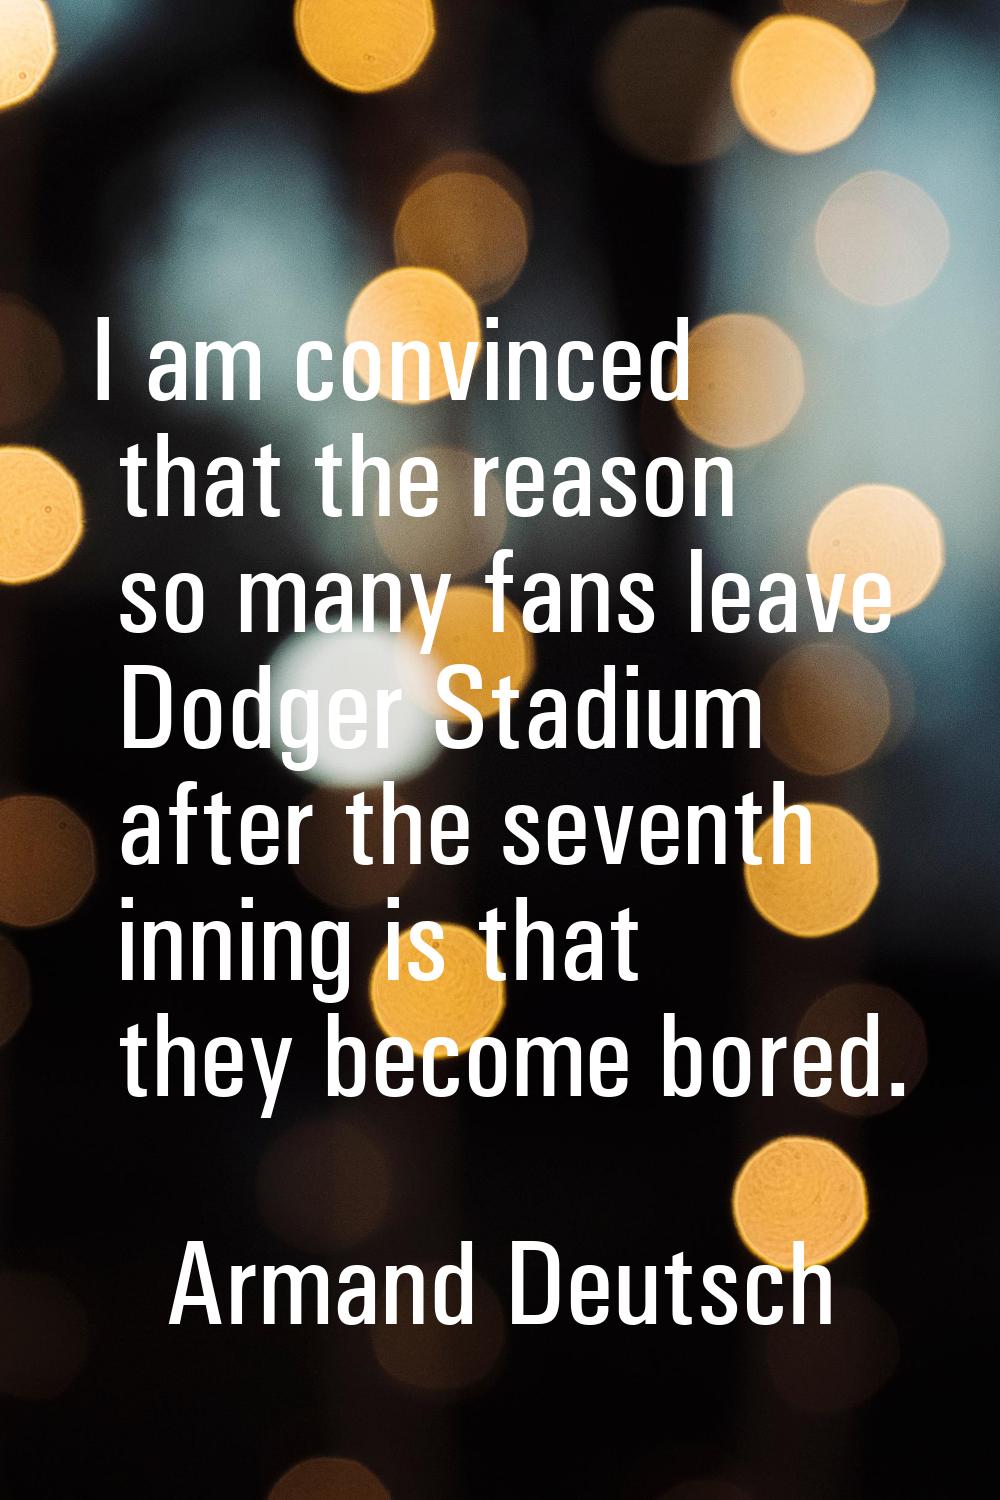 I am convinced that the reason so many fans leave Dodger Stadium after the seventh inning is that t